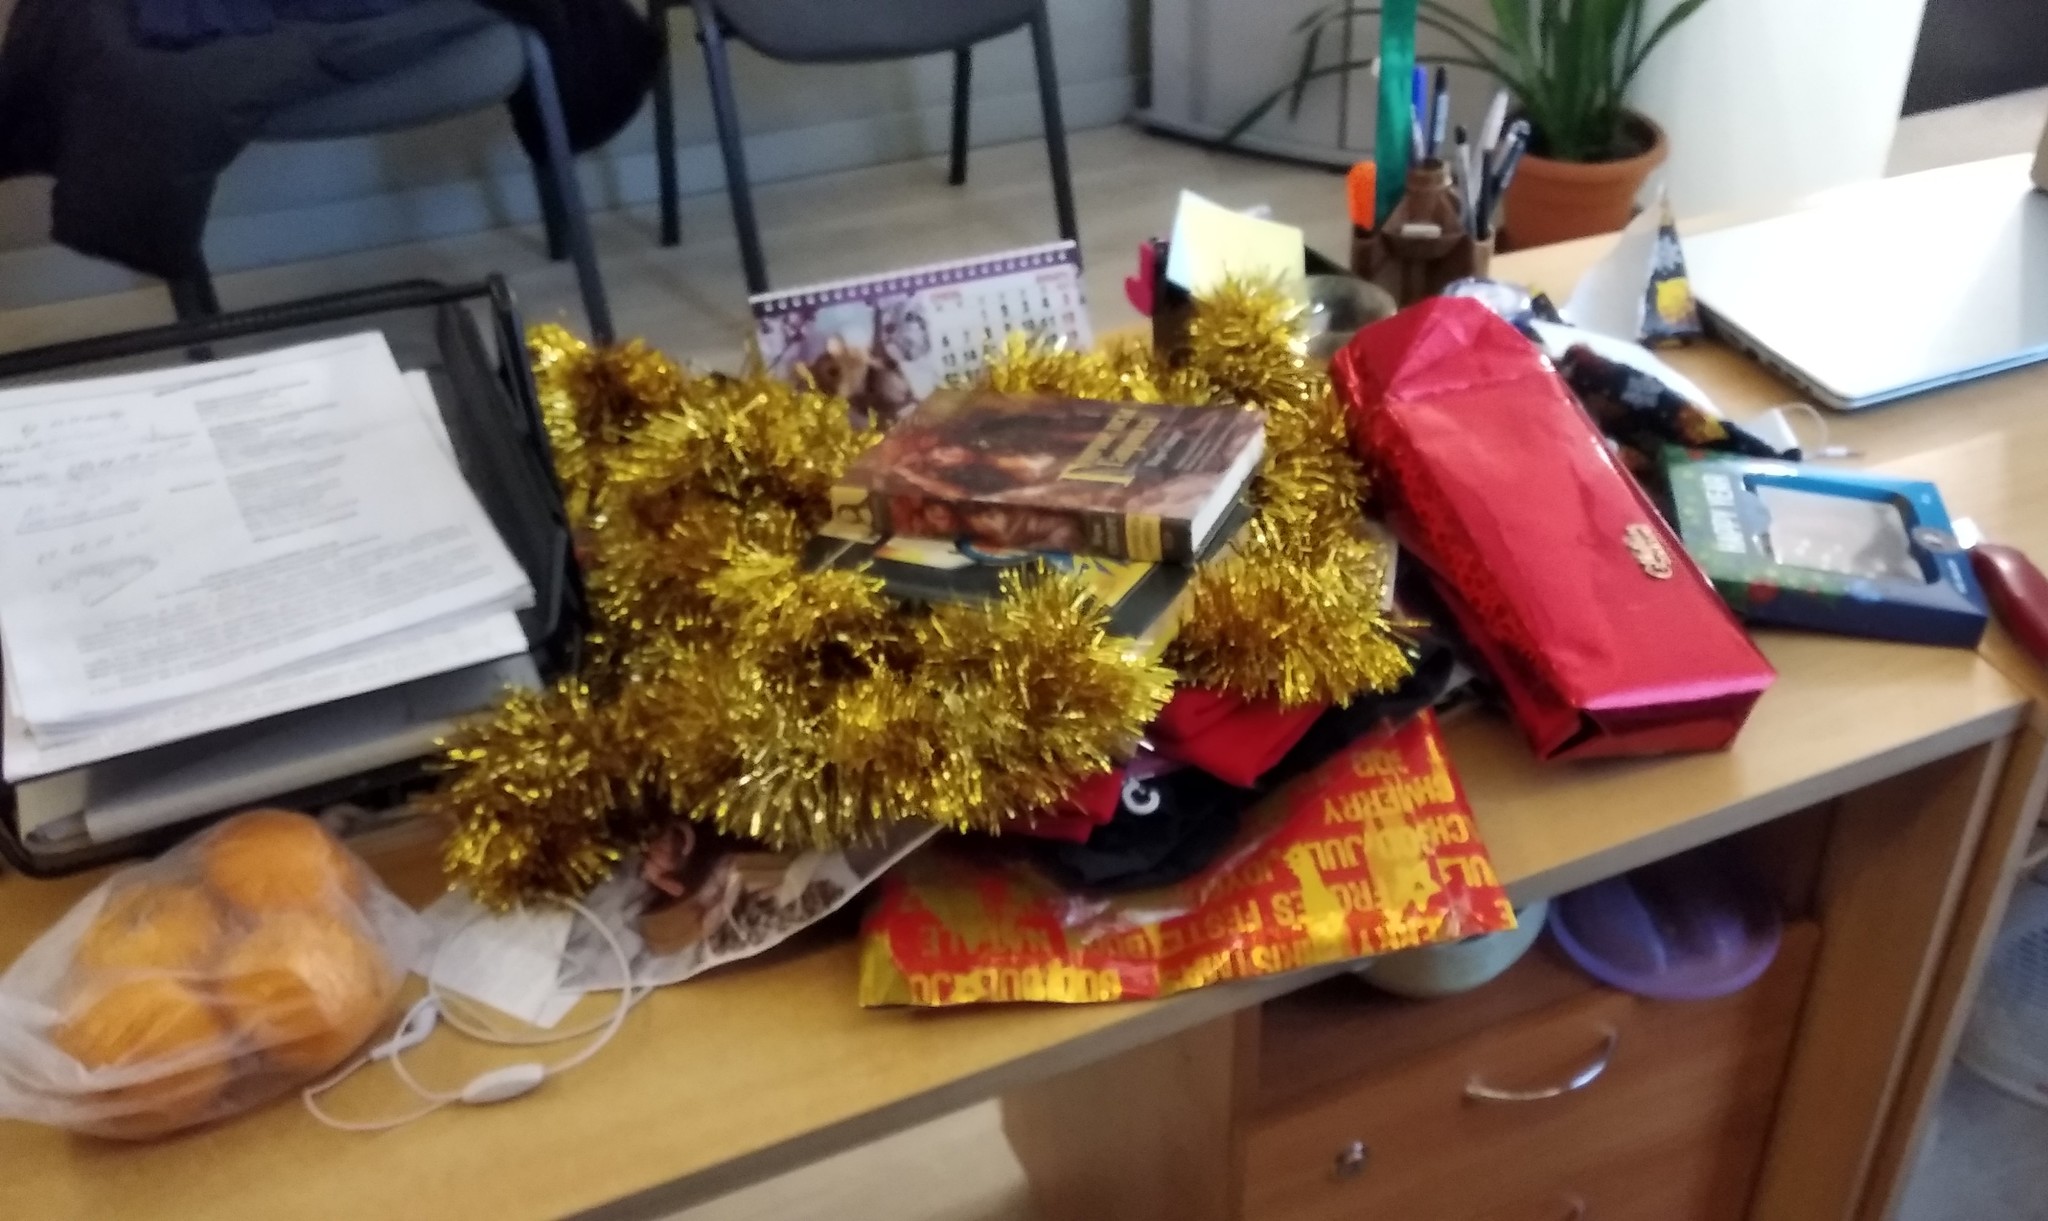 New Year's gift from the altruistic Snow Maiden from Zhitomir to Dnieper! - My, Gift exchange, Longpost, Snow Maiden, Altruism, Thank you, New Year's miracle, Secret Santa, Gift exchange report